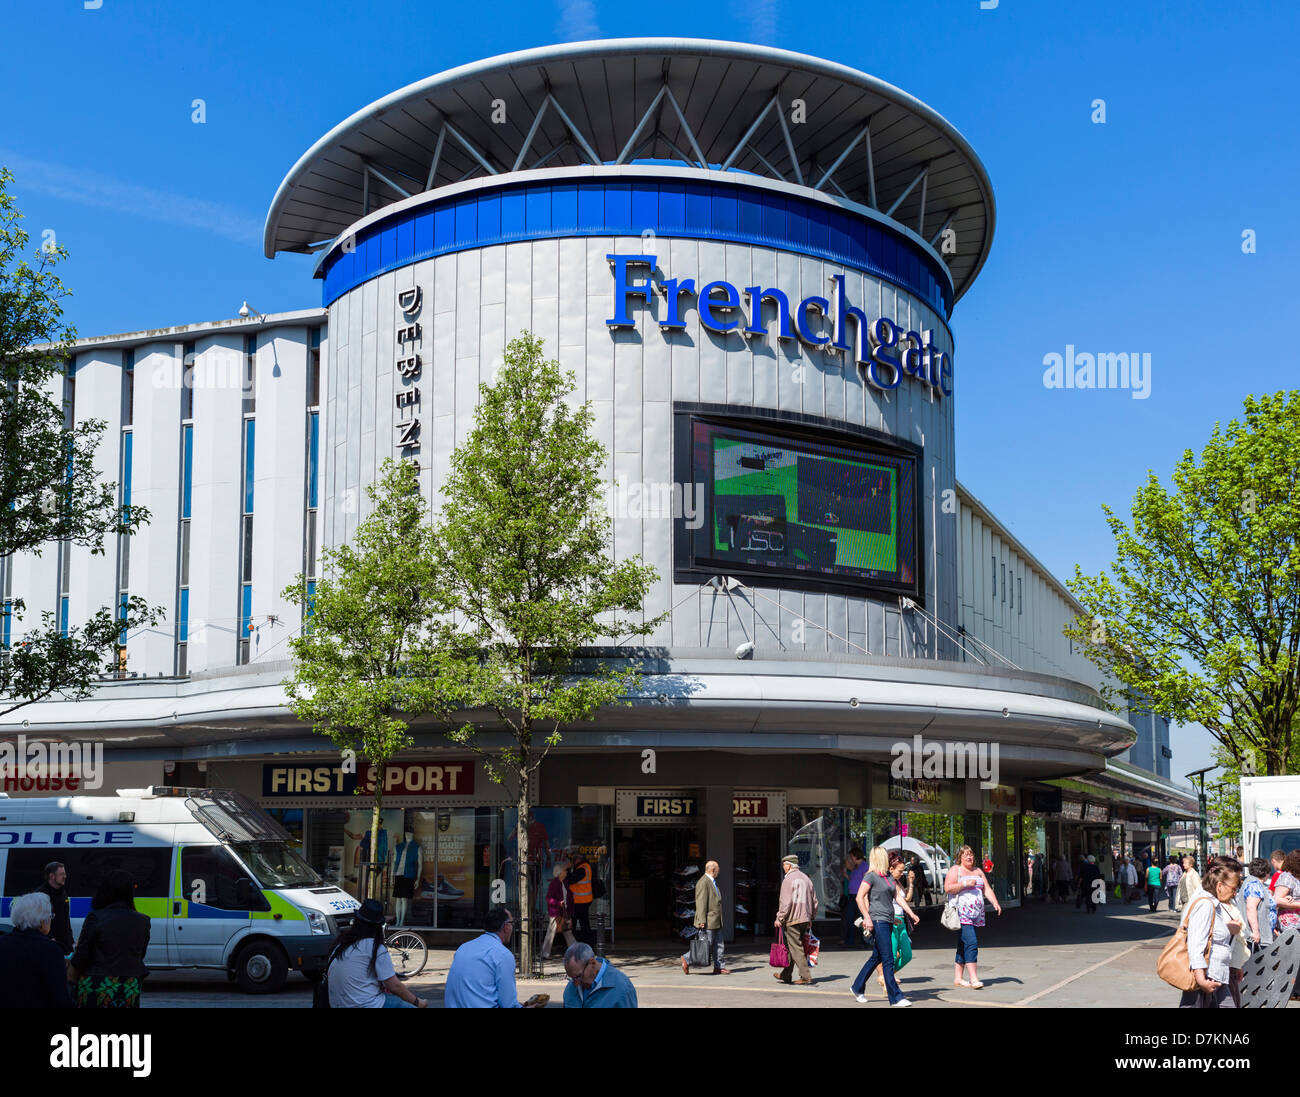 Frenchgate shopping centre in the town centre, Doncaster, South Yorkshire, England, UK Stock Photo